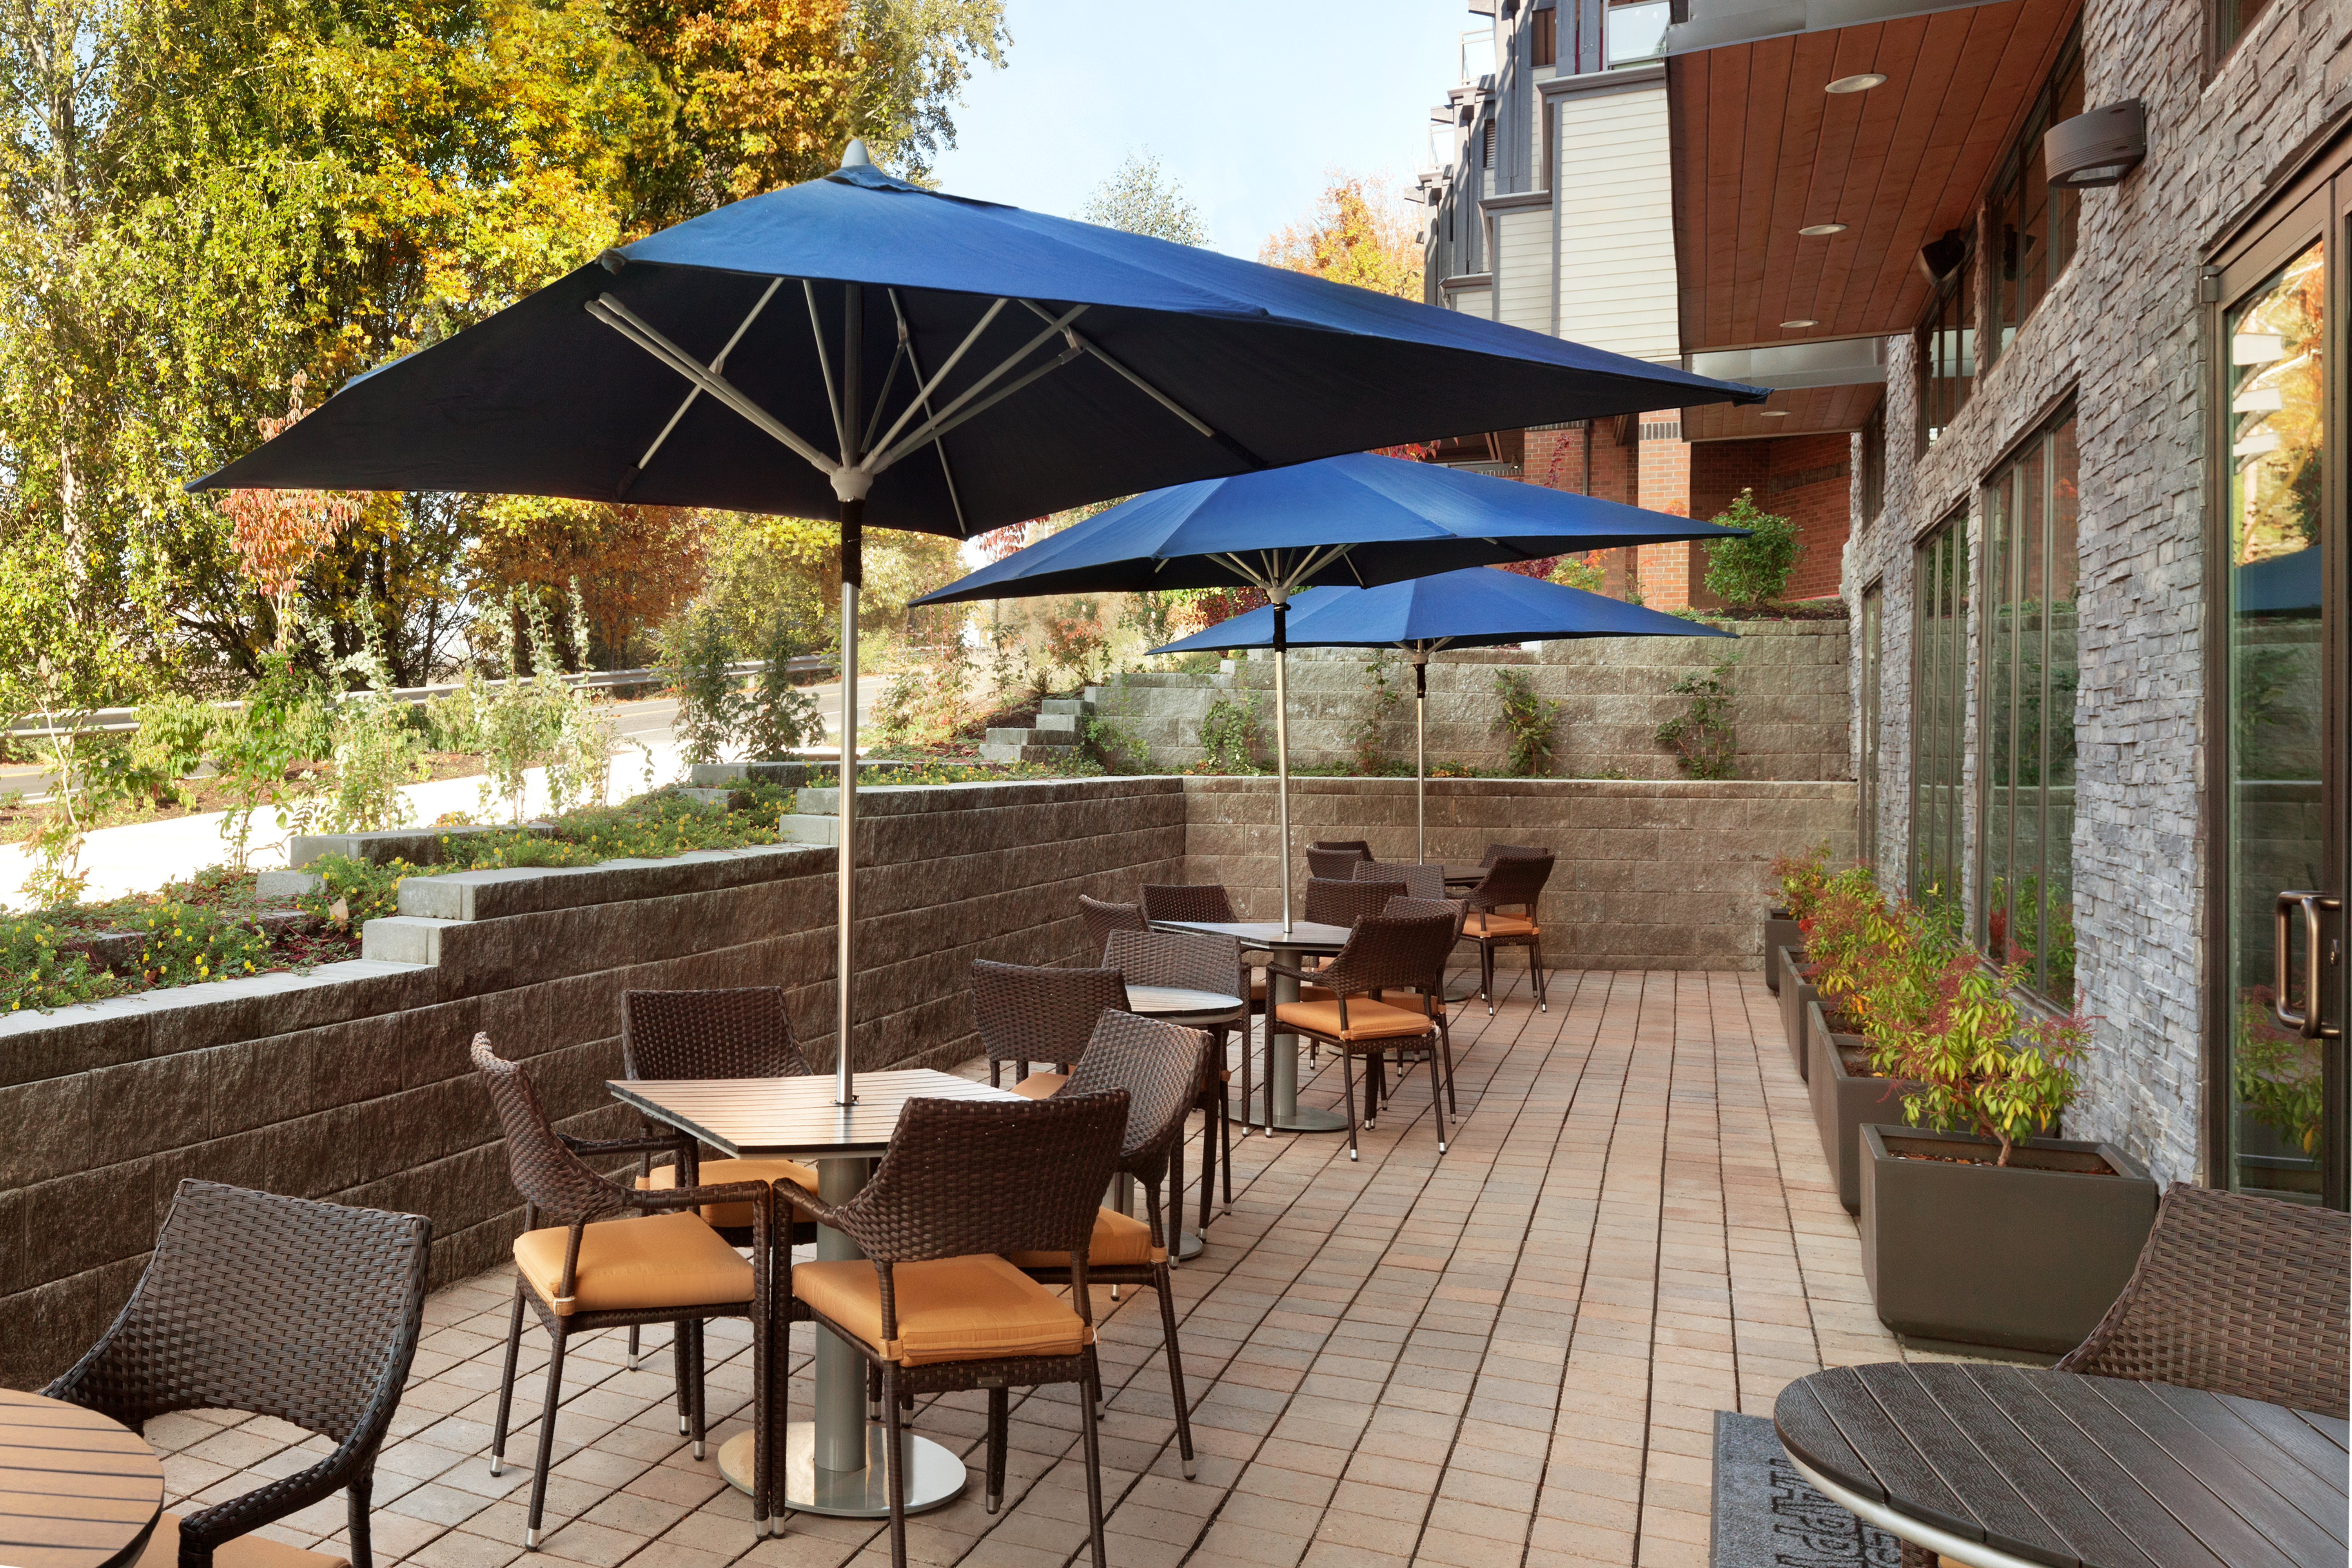 Breakfast Outdoor Patio with Chairs, Tables and Umbrellas